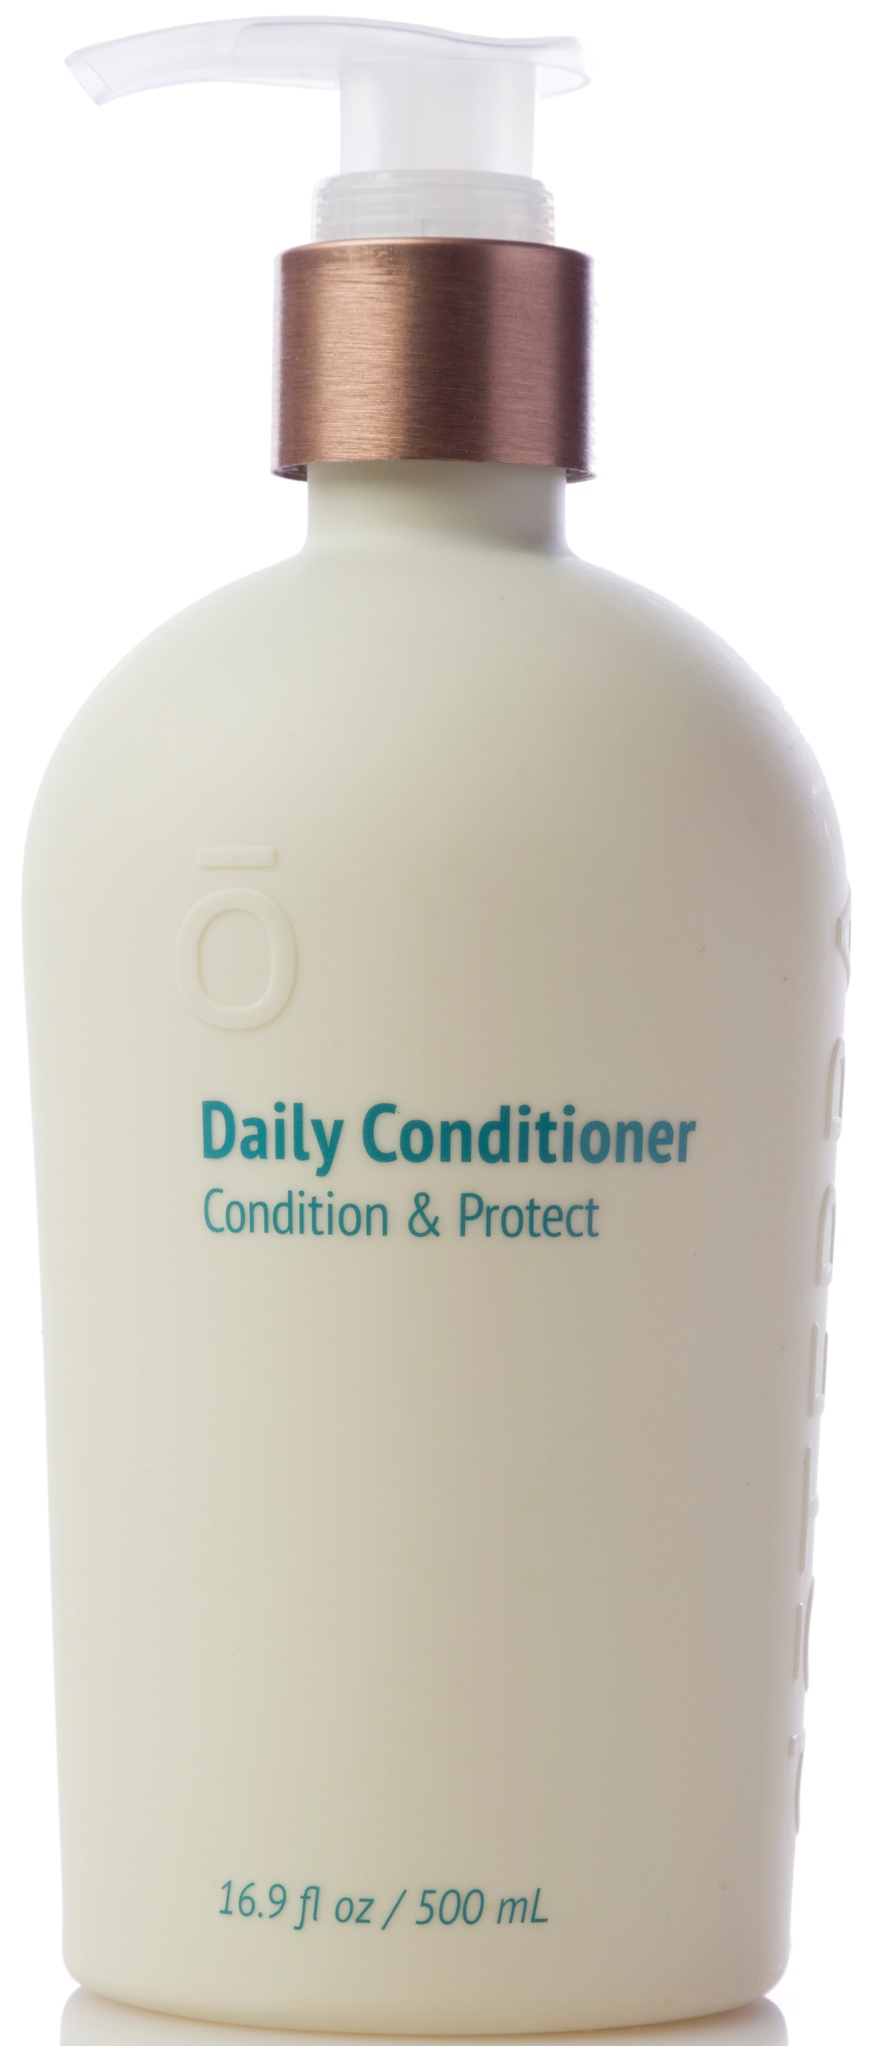 doTERRA Daily Conditioner